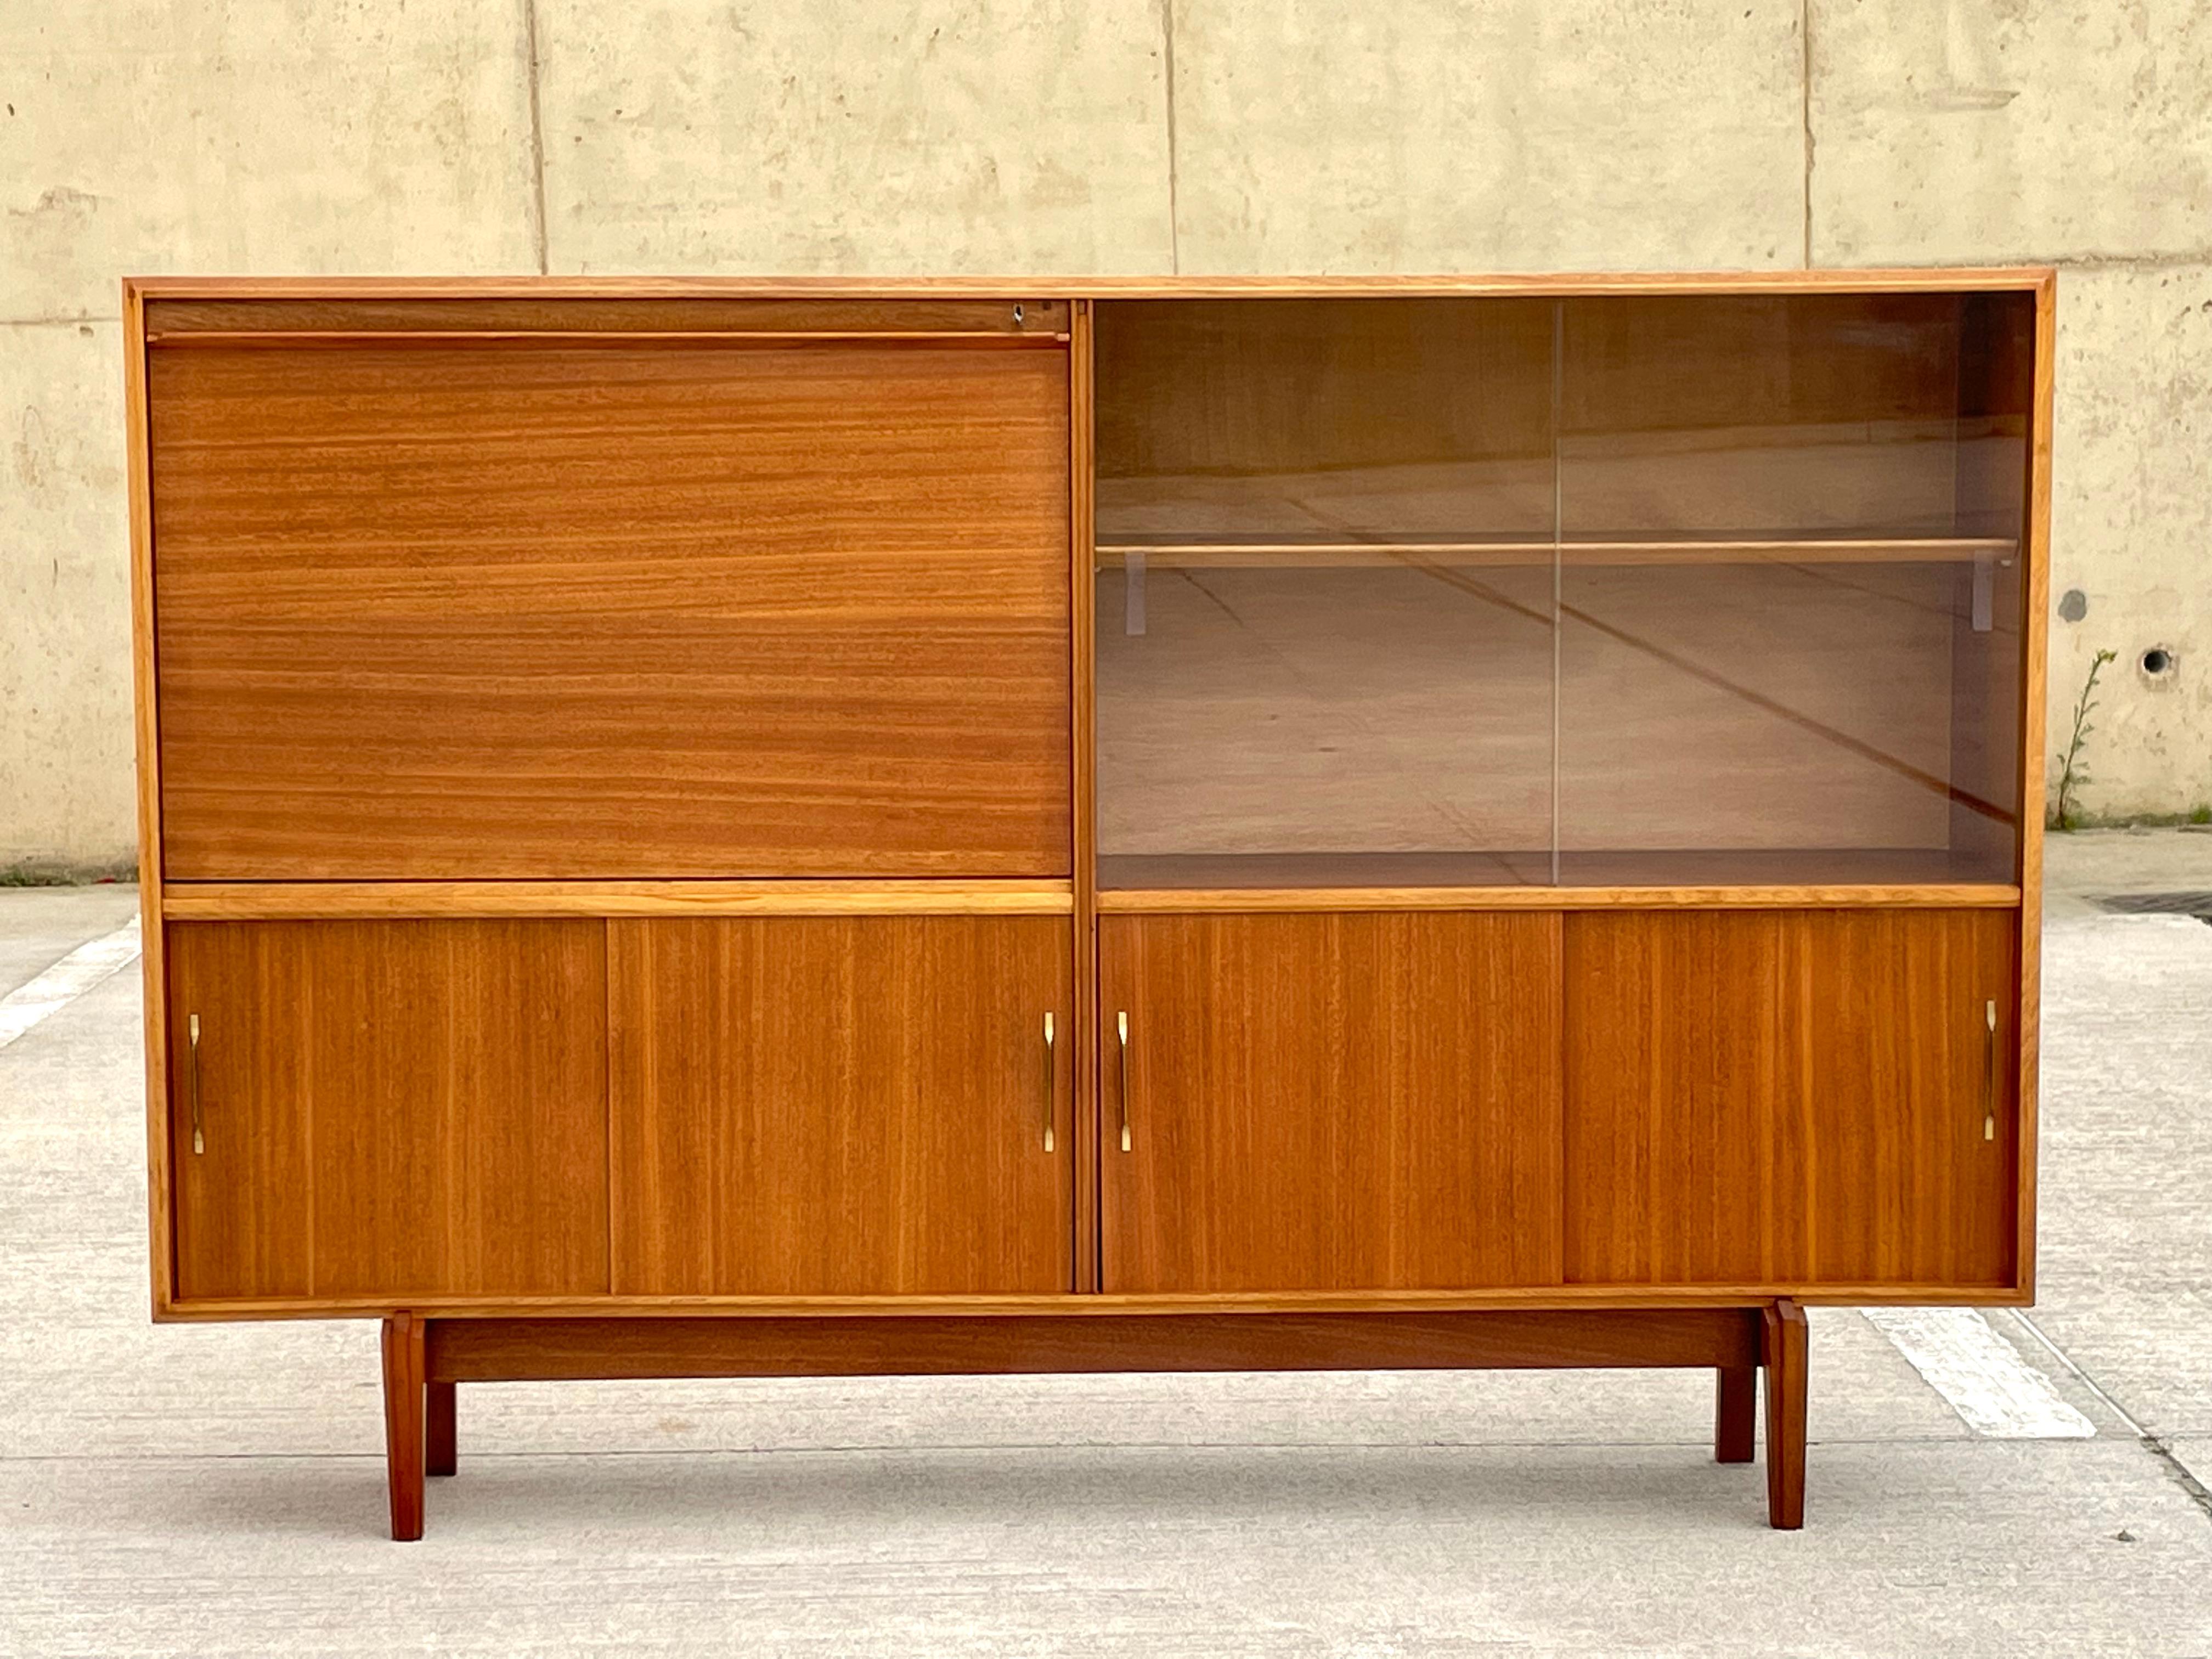 British Mid-Century Modern Drinks Cocktail Cabinet Sideboard by Beaver and Tapley